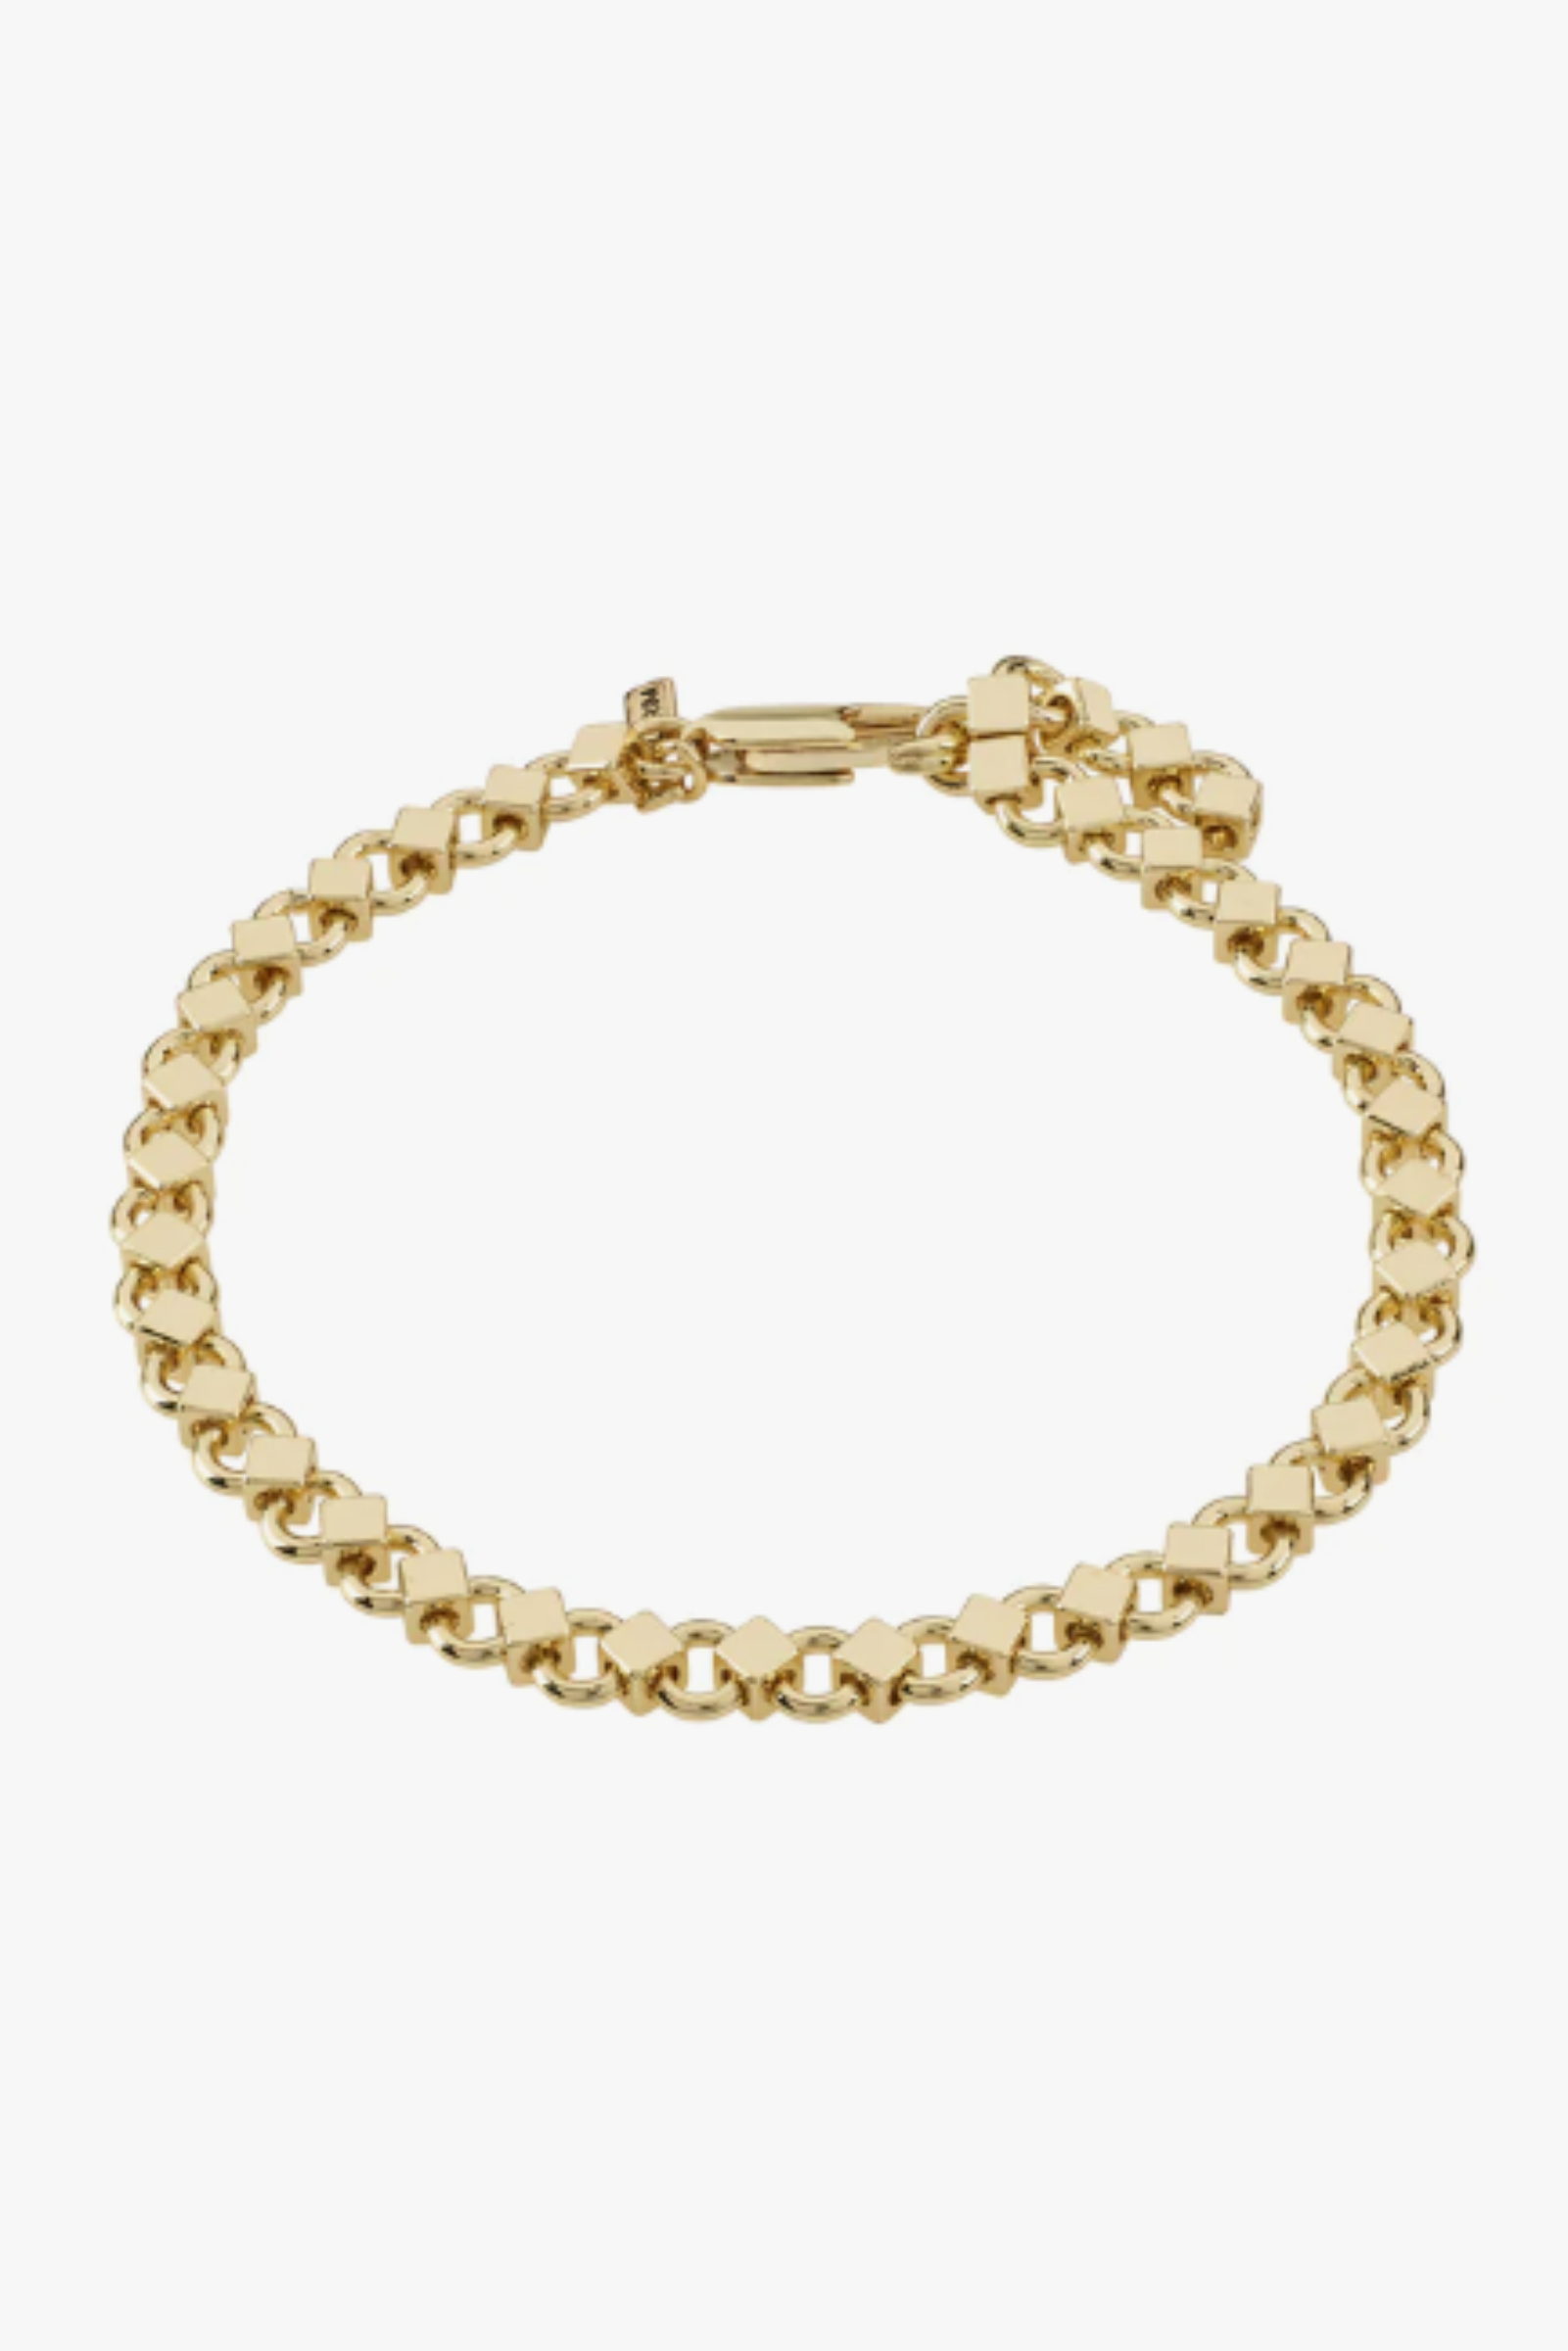 Desiree Recycled Bracelet - Gold Plated